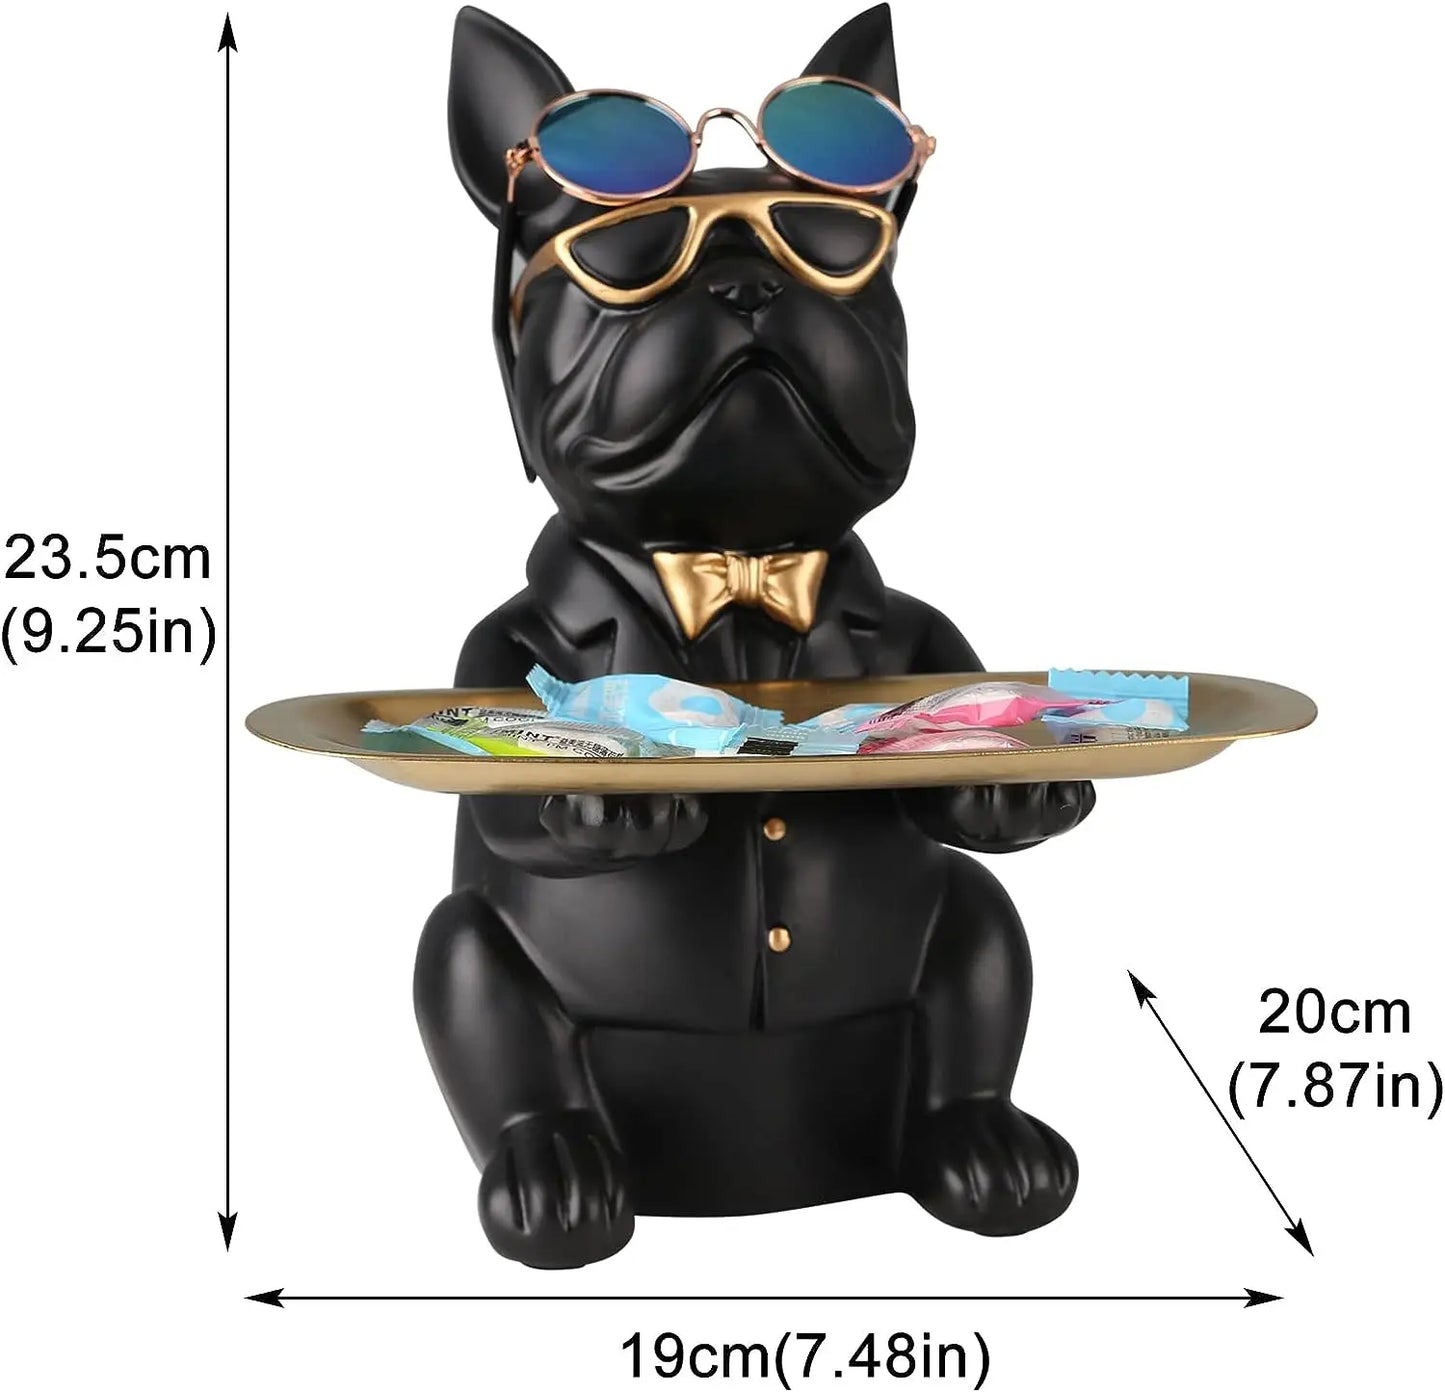 Resin Bulldog Desk Storage Tray Statue Coin Piggy Bank Storage Animal Sculpture Table Decoration Multifunction Office Home Decor